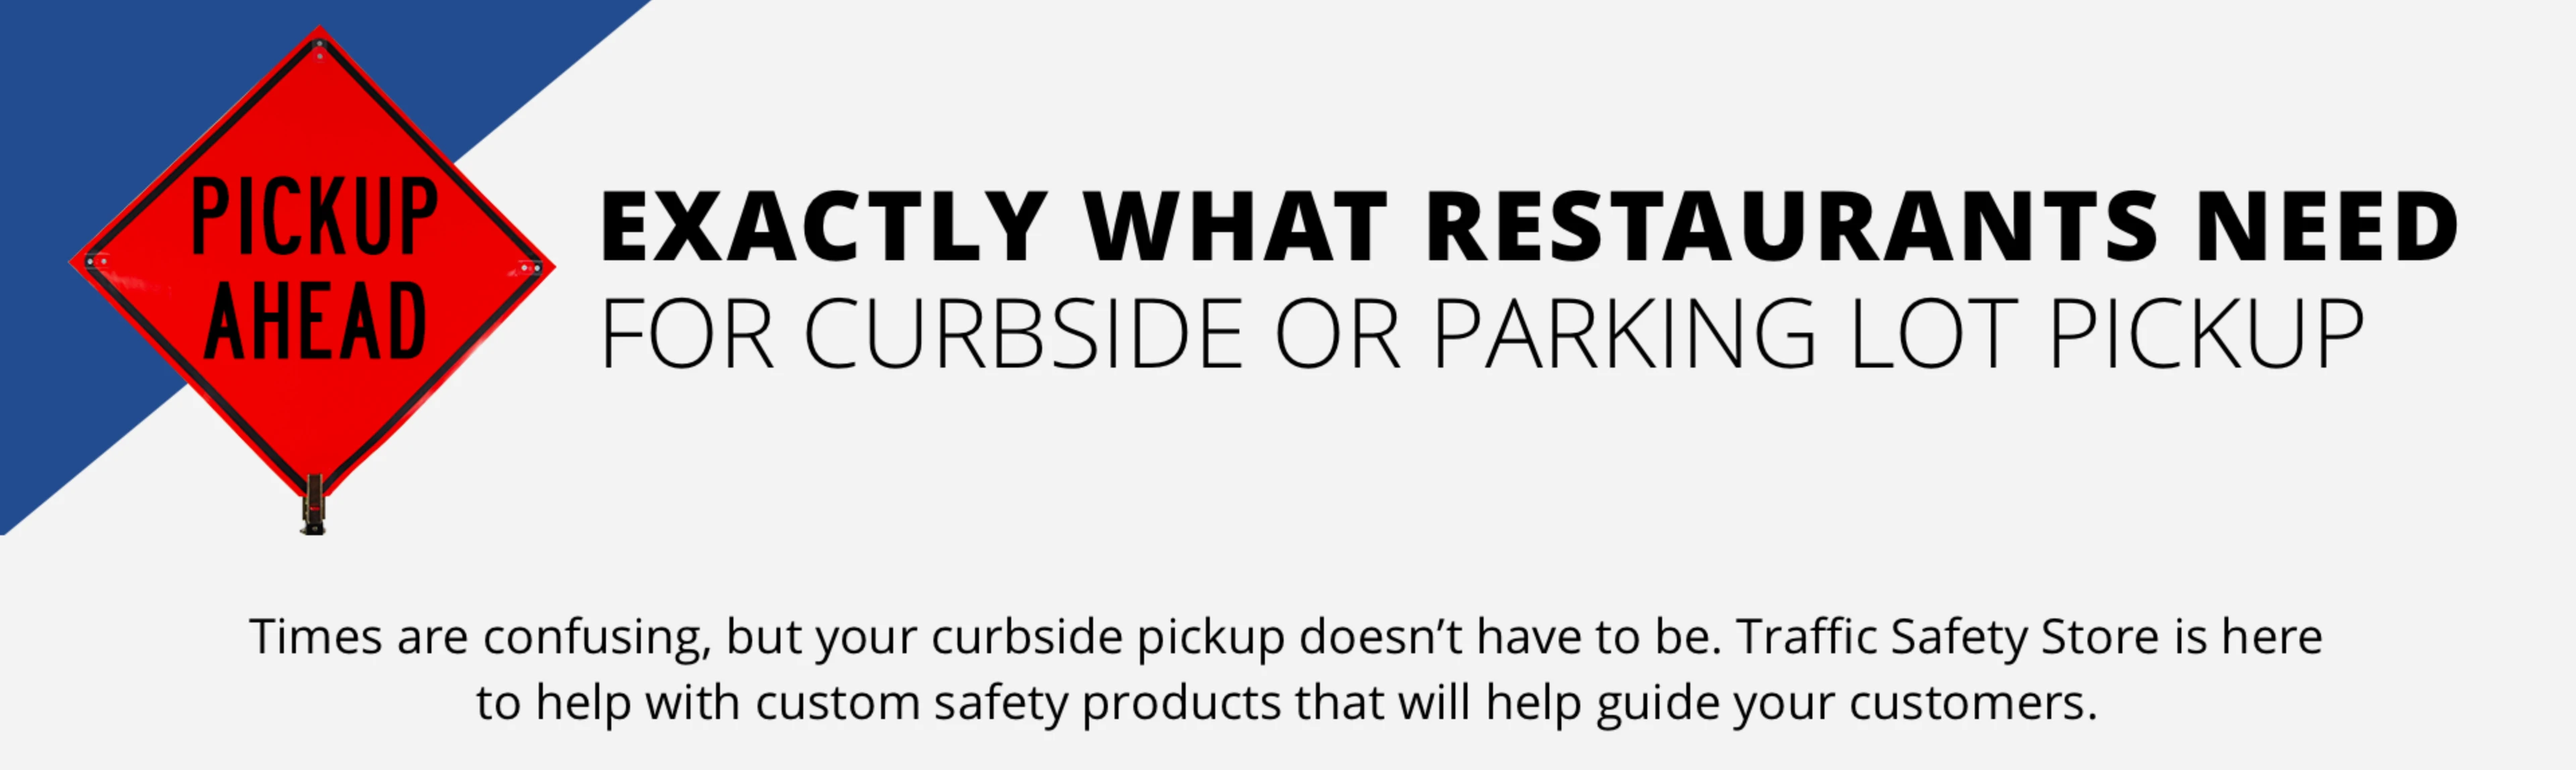 Times are confusing, but your curbside pickup doesn't have to be. Traffic Safety Store is here to help with custom safety products that will help guide your customers